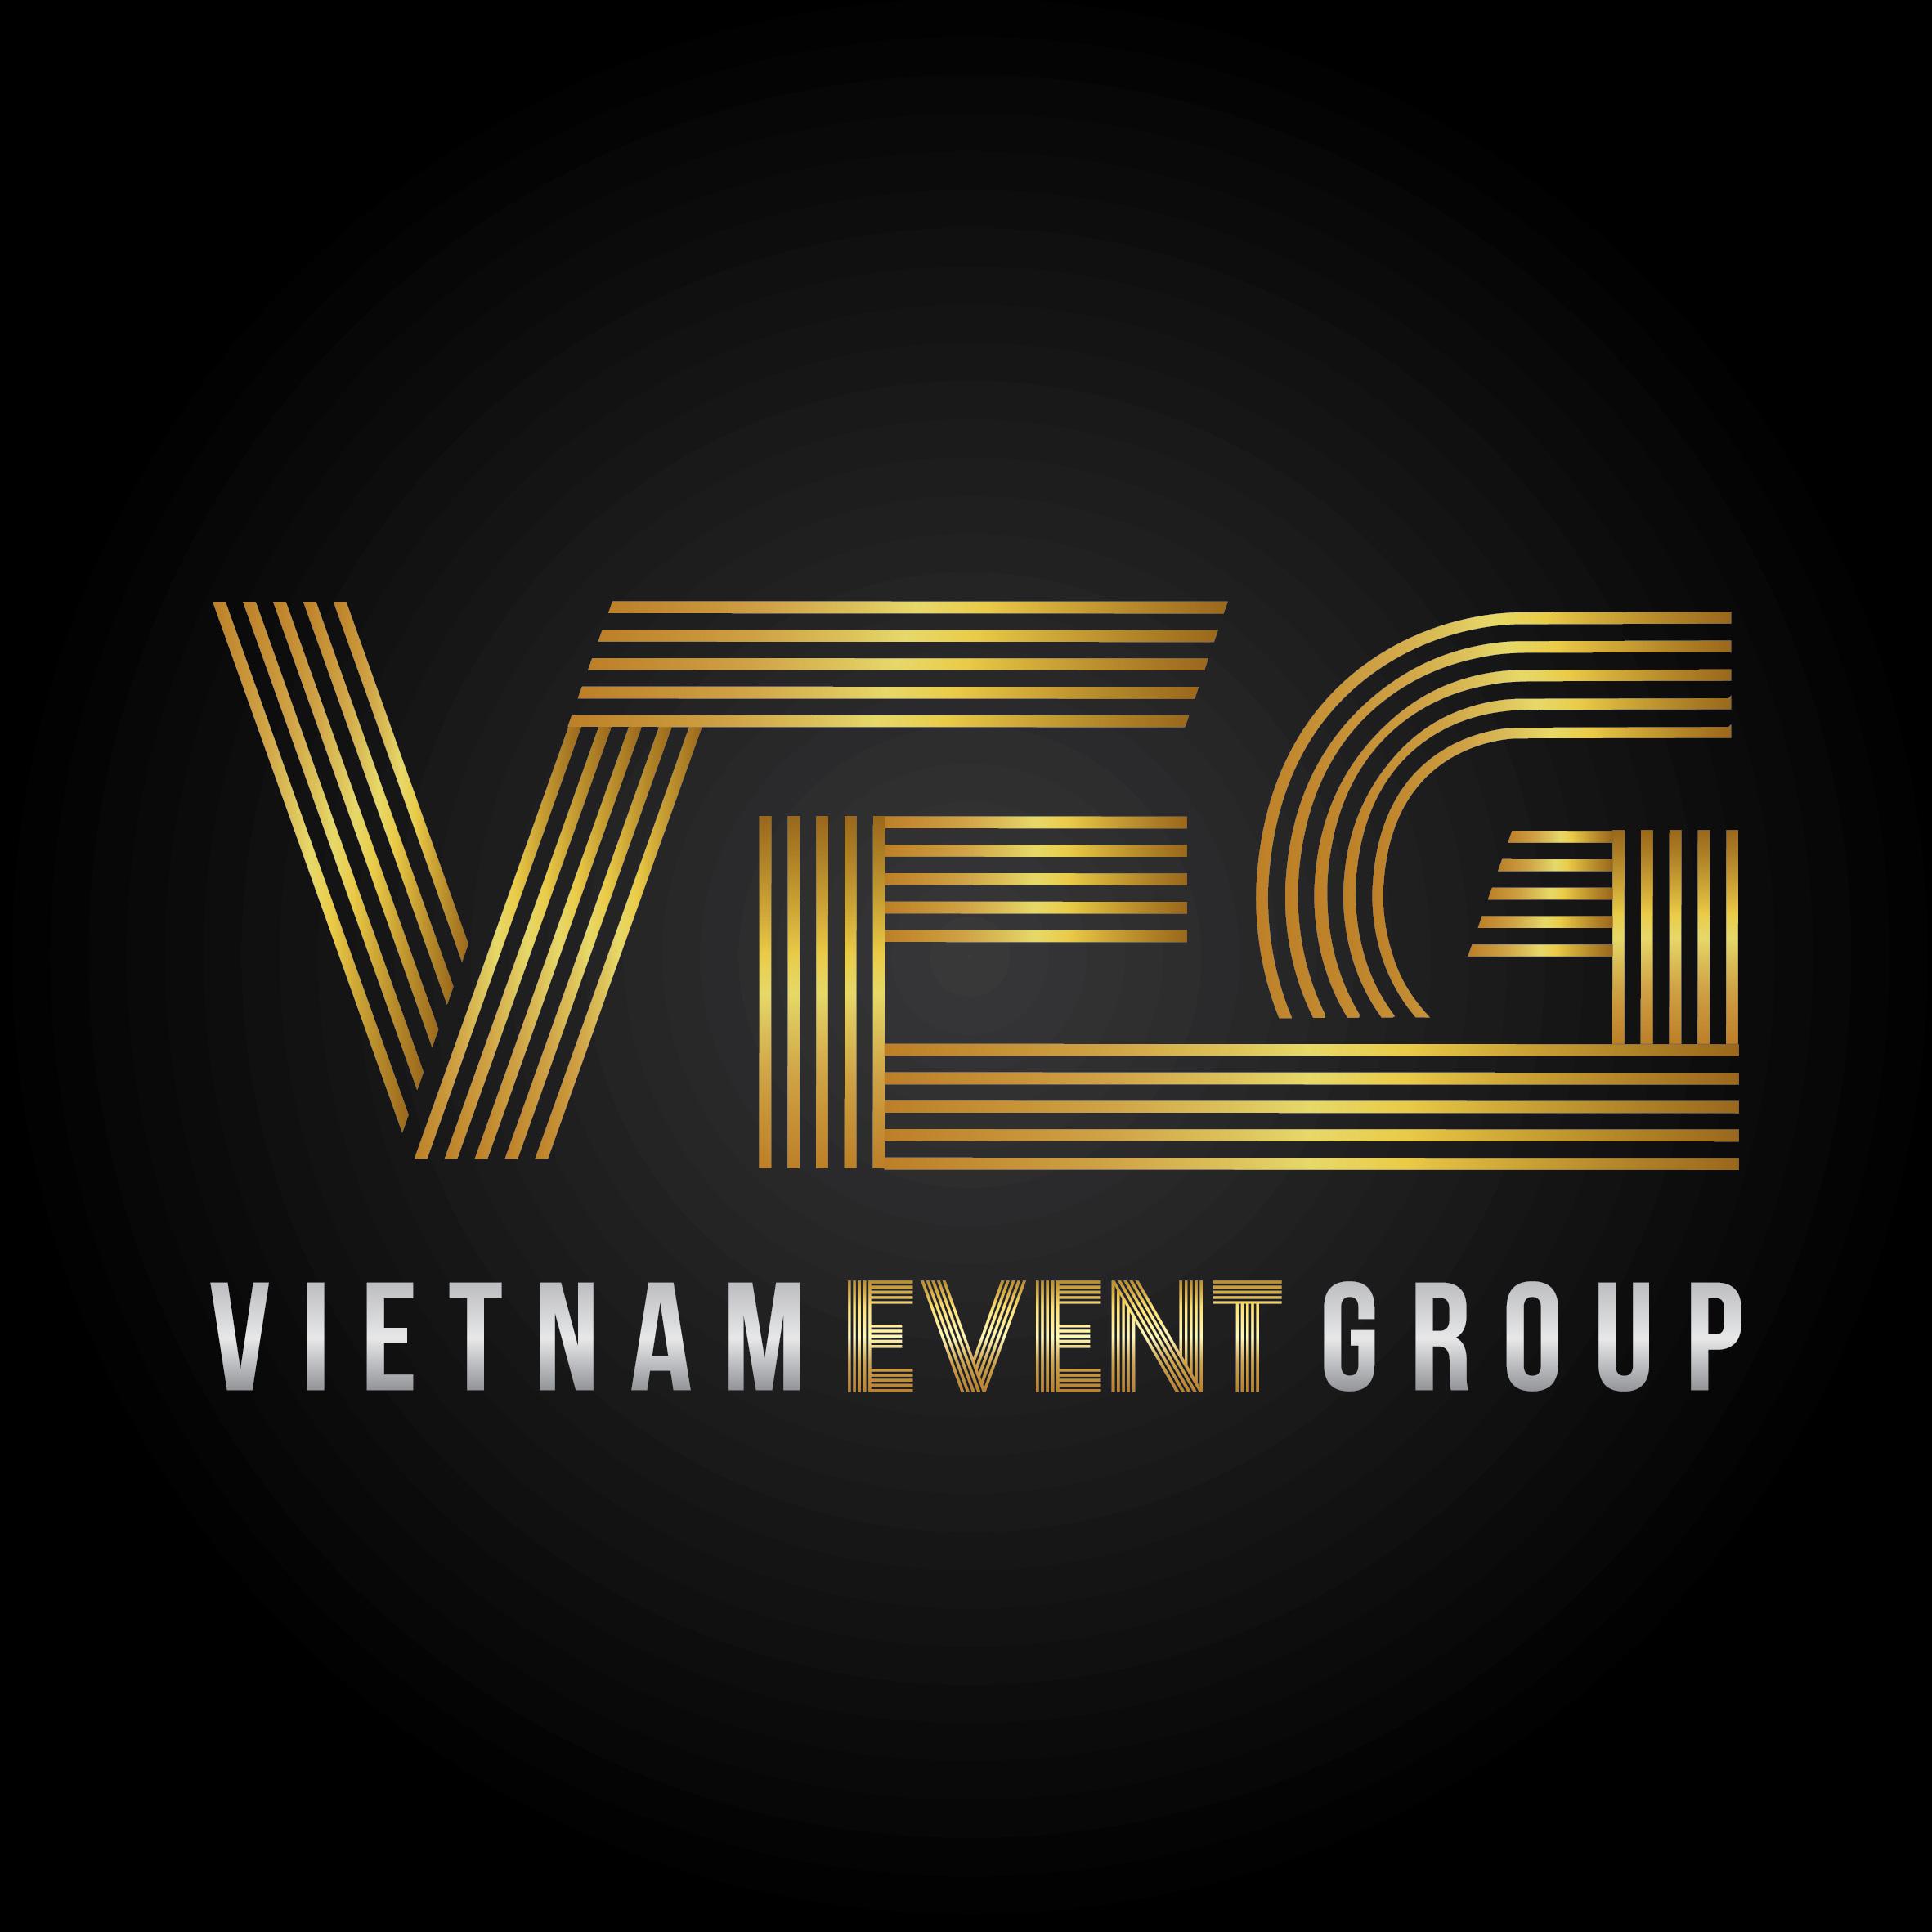 VietNam Event Group - VEG profile on Qualified.One